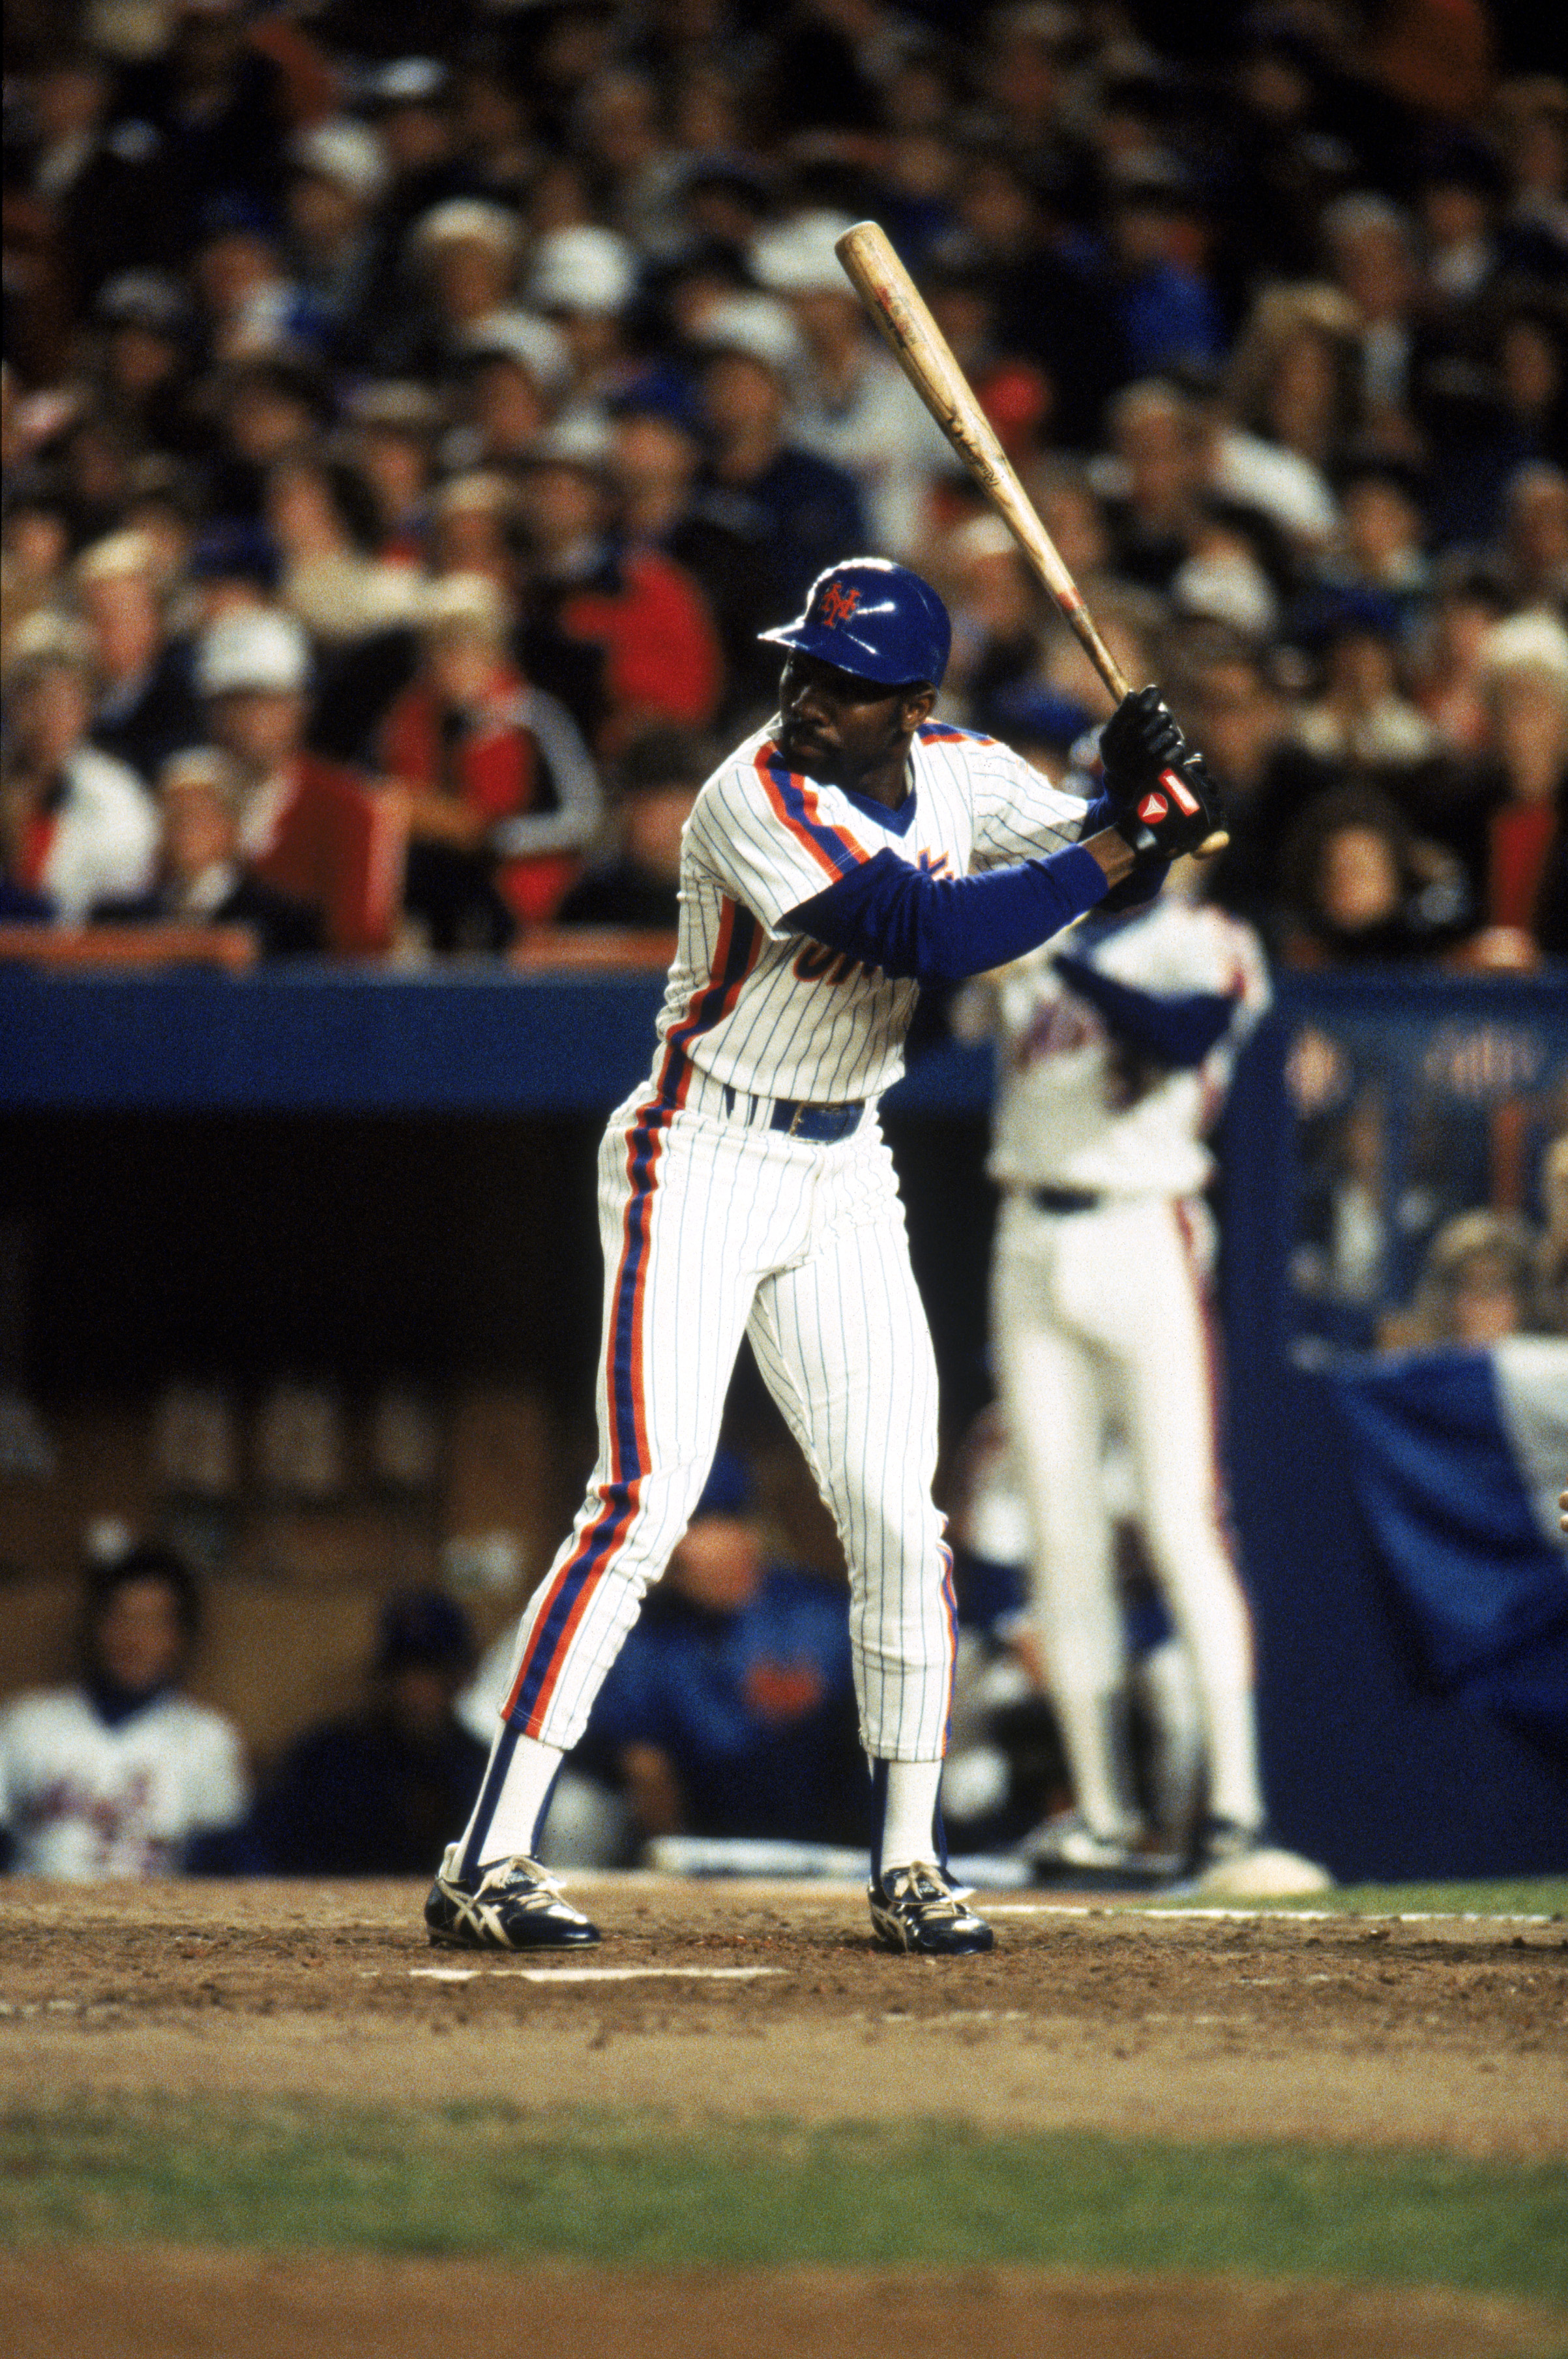 FLUSHING, NY - OCTOBER 27:  Outfielder Mookie Wilson #1 of the New York Mets at bat during game 7 of the 1986 World Series against the Boston Red Sox at Shea Stadium on October 27, 1986 in Flushing, New York. The Mets won the series 4-3.  (Photo by T.G. H